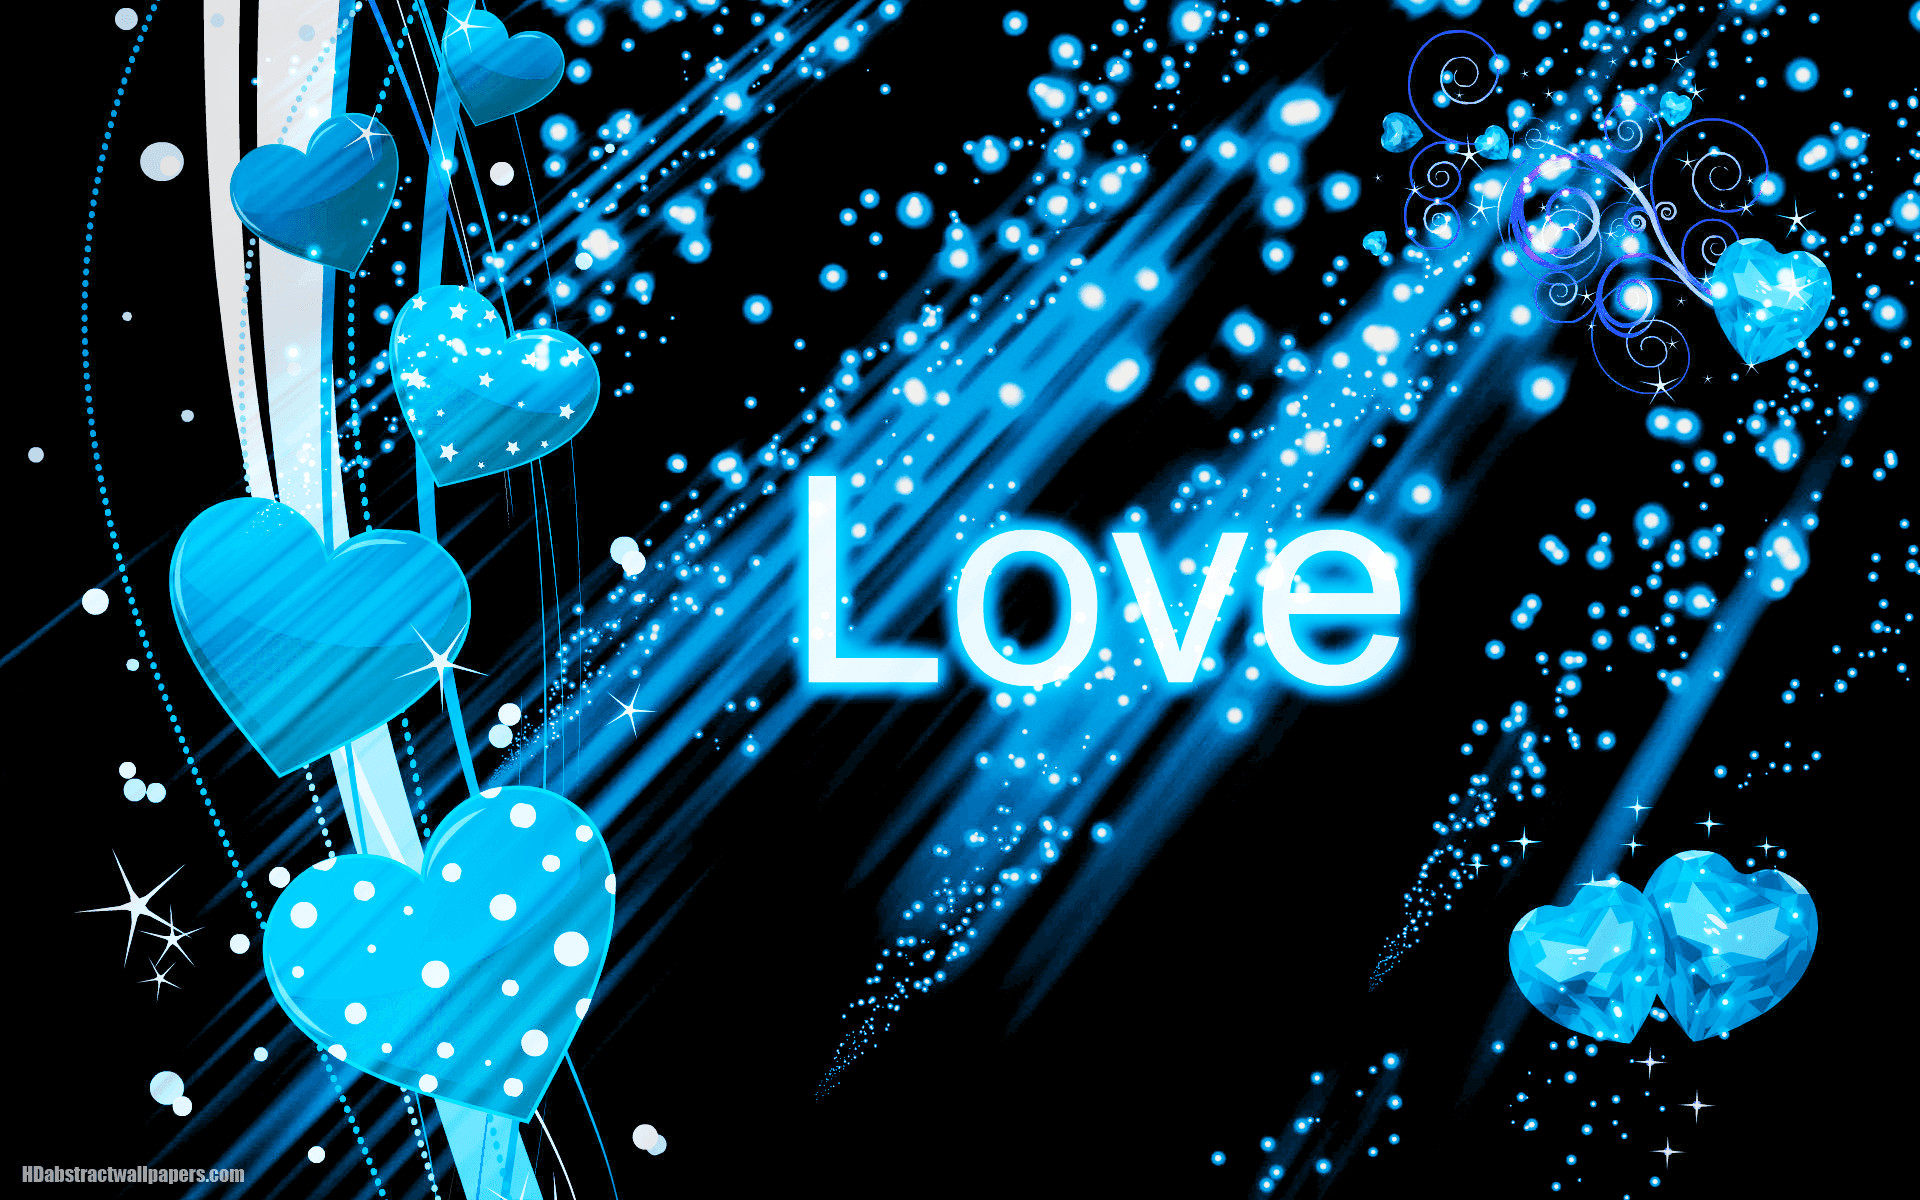 Beautiful black abstract wallpaper with blue love hearts and the text love. Send this background to your boy or girlfriend, just to say that you are deeply